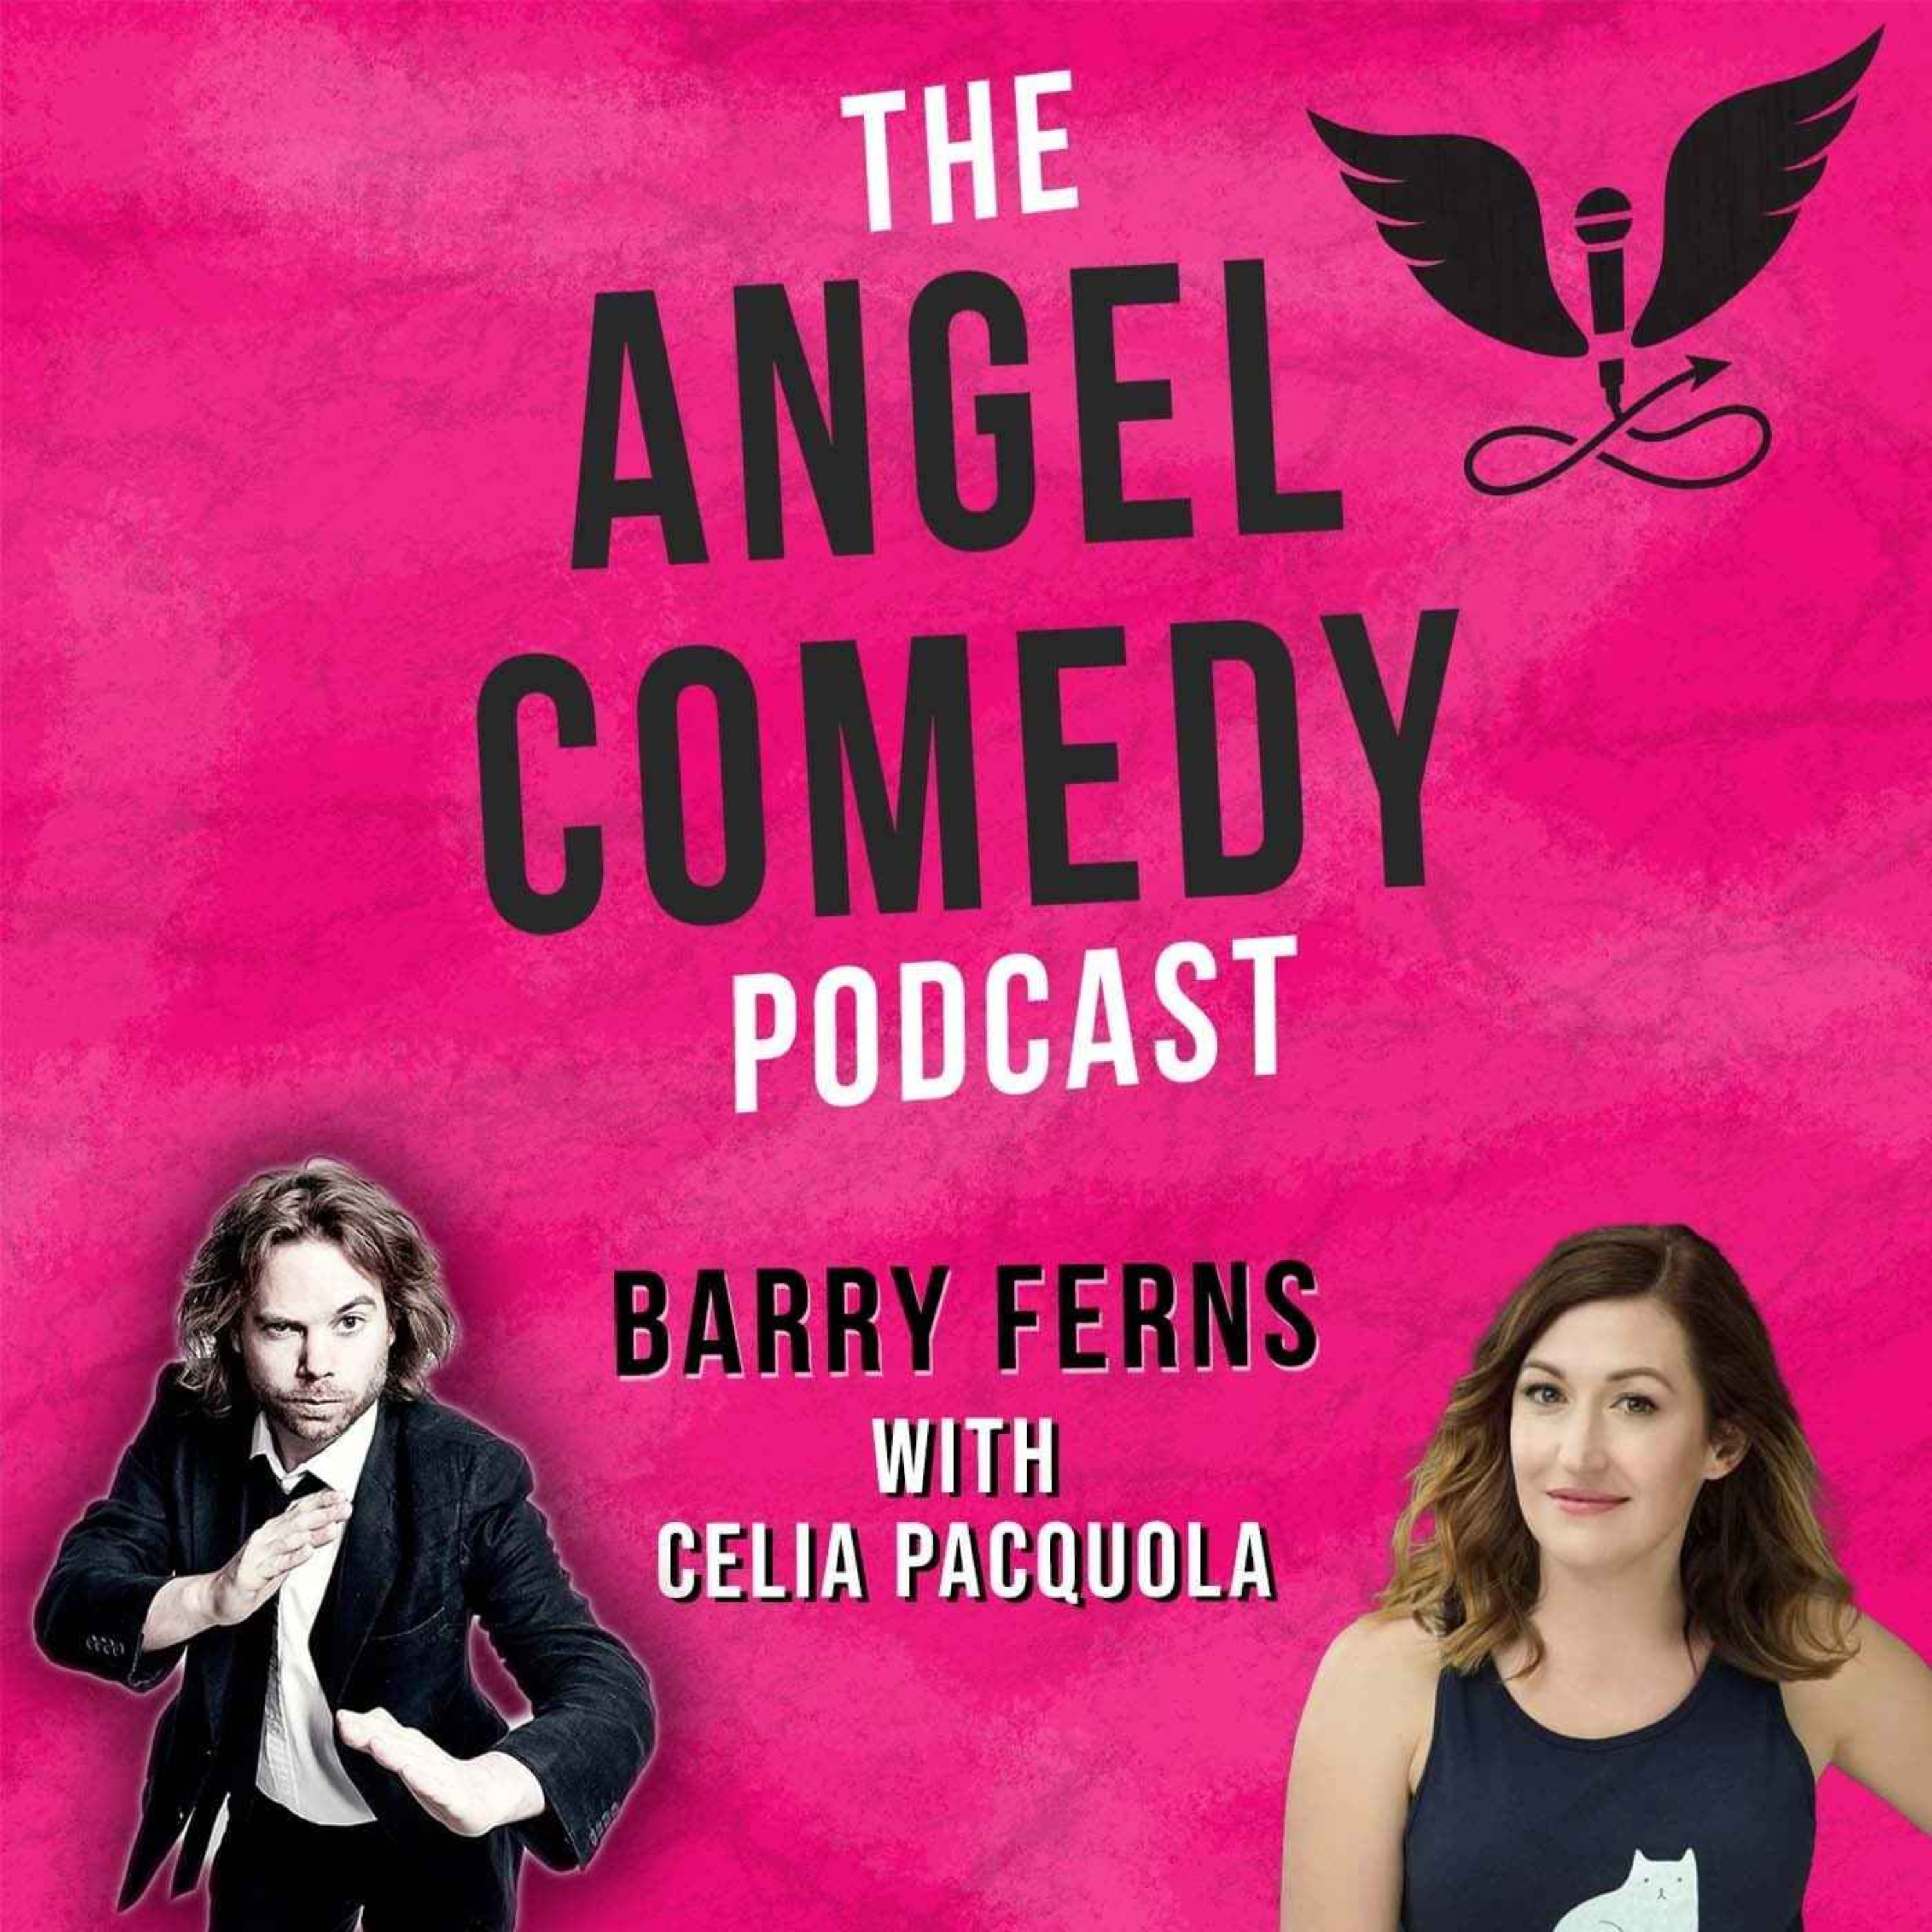 Podcast: The Angel Comedy Podcast with Celia Pacquola - Angel Comedy